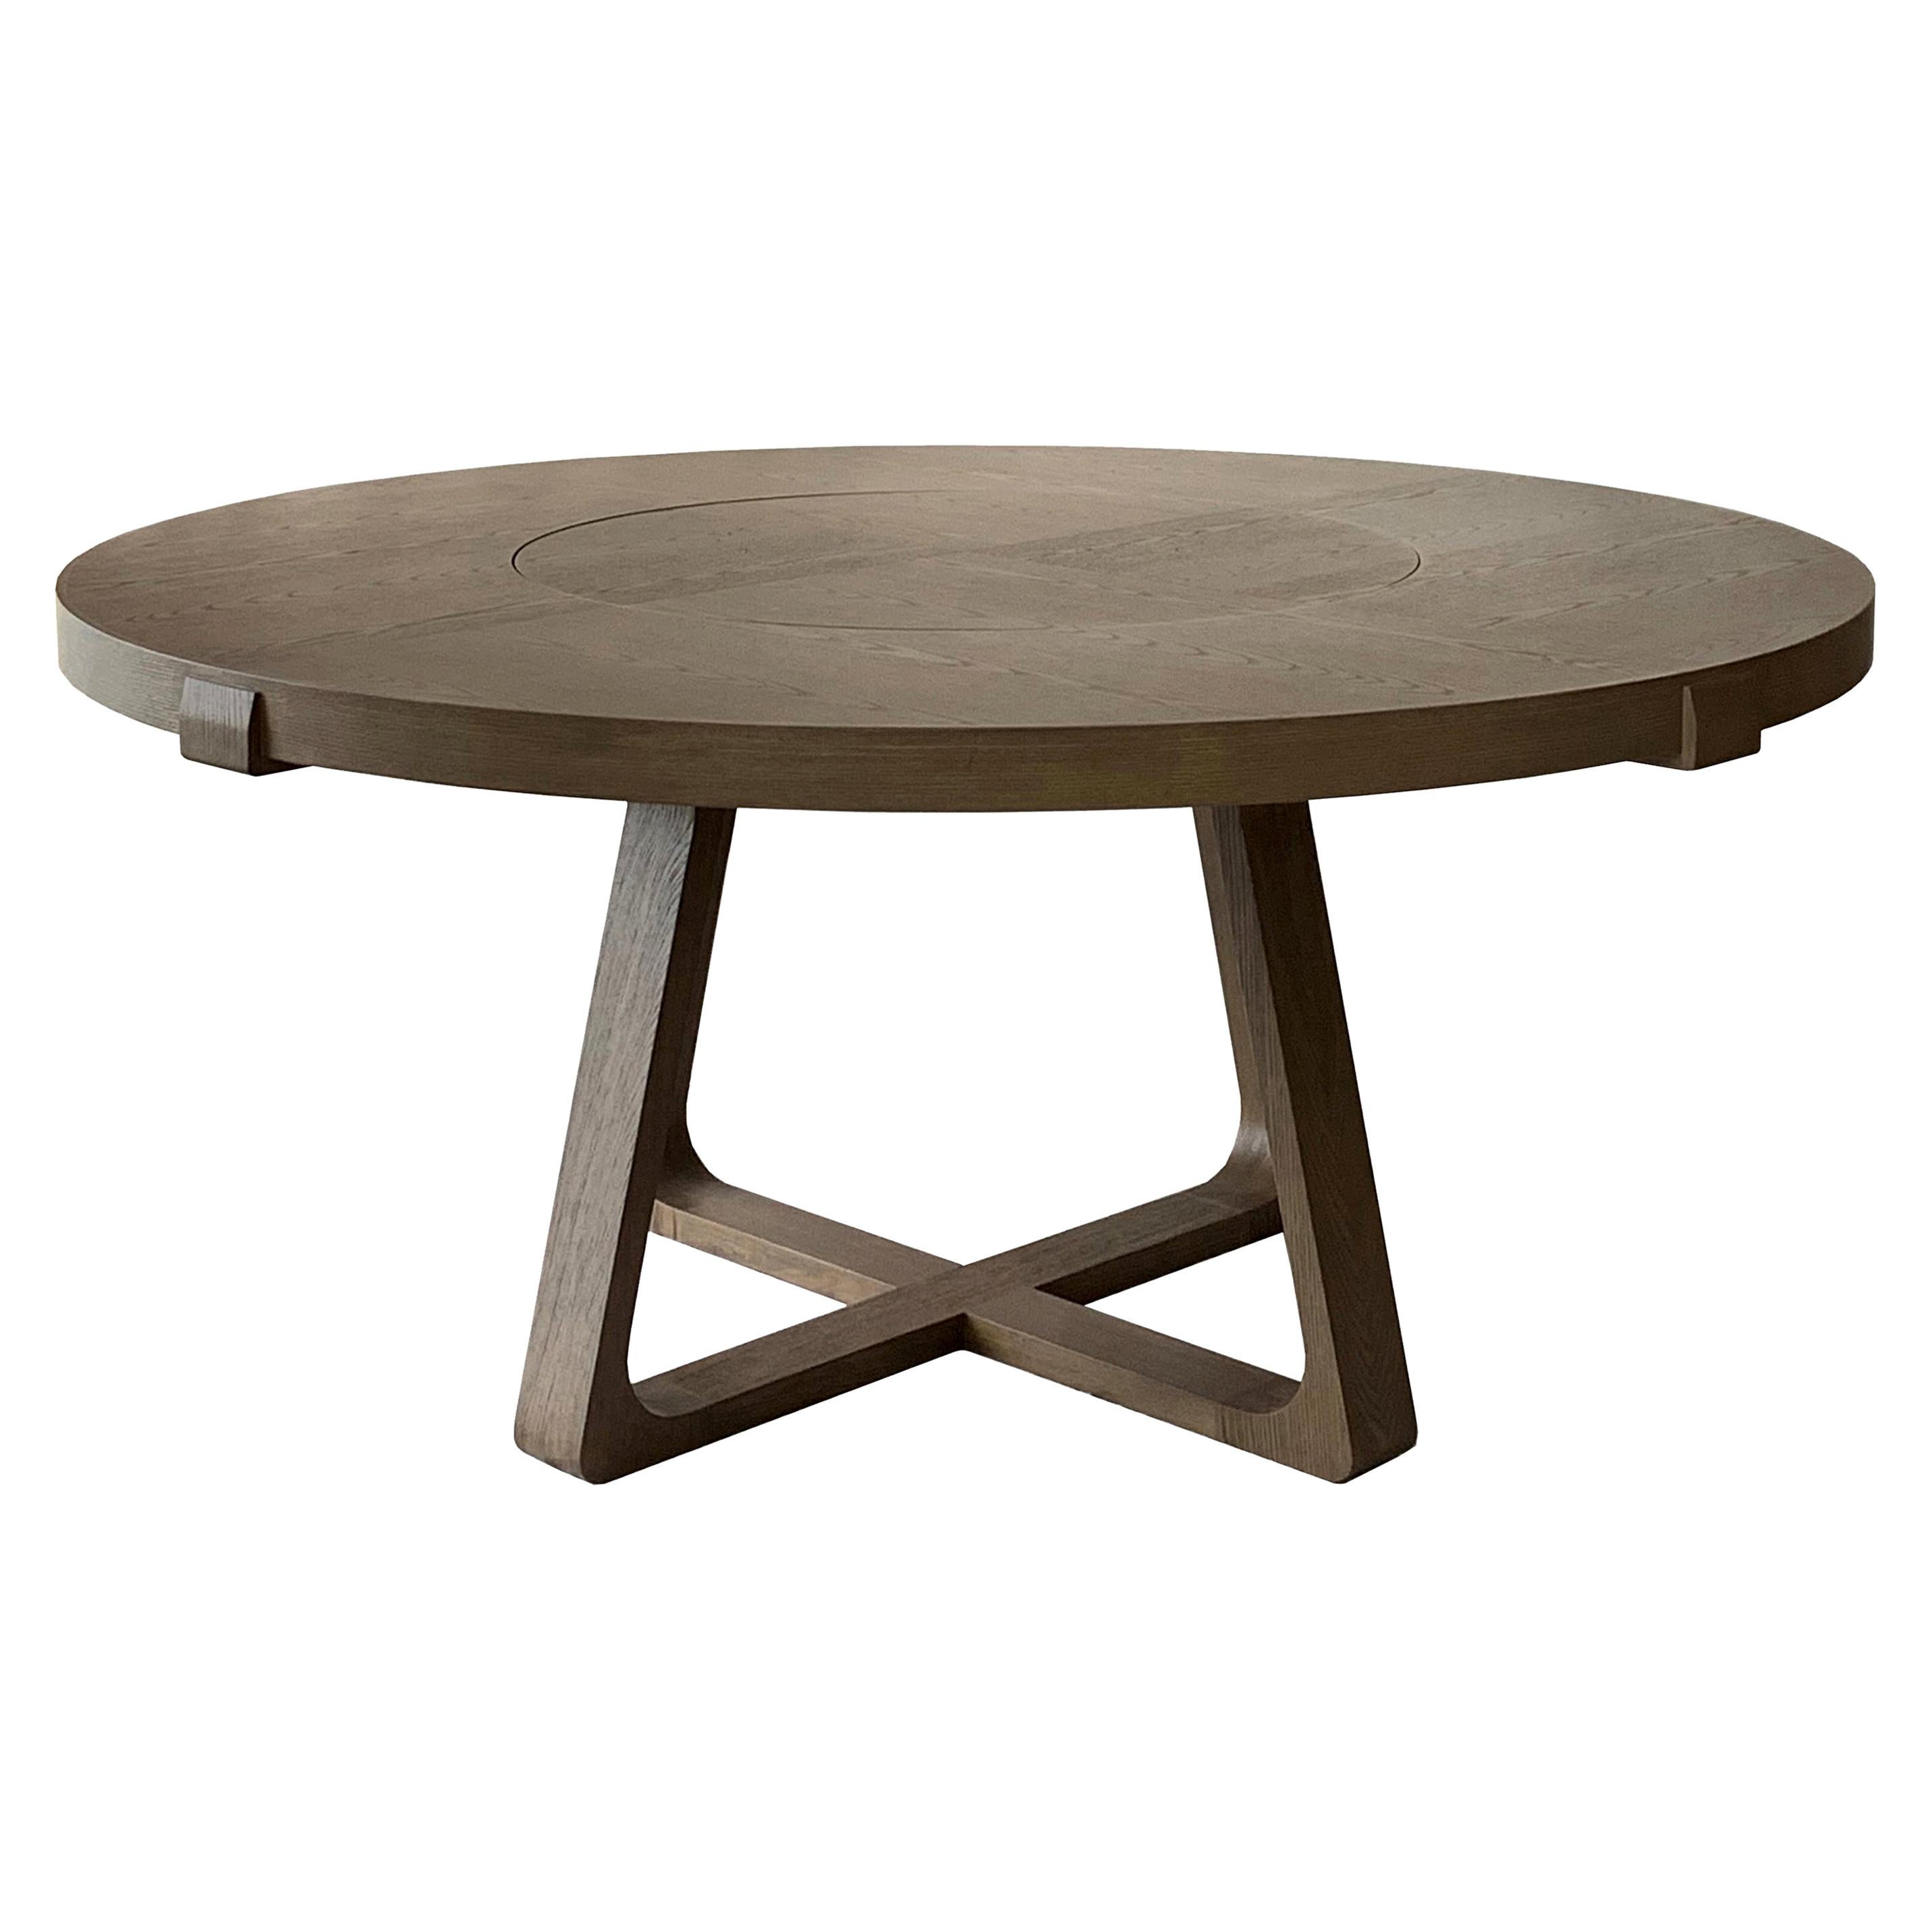 https://a.1stdibscdn.com/round-dining-table-with-lazy-susan-150cm-interlock-andre-fu-living-grey-oak-for-sale/1121189/f_207972721601567824153/20797272_master.jpg